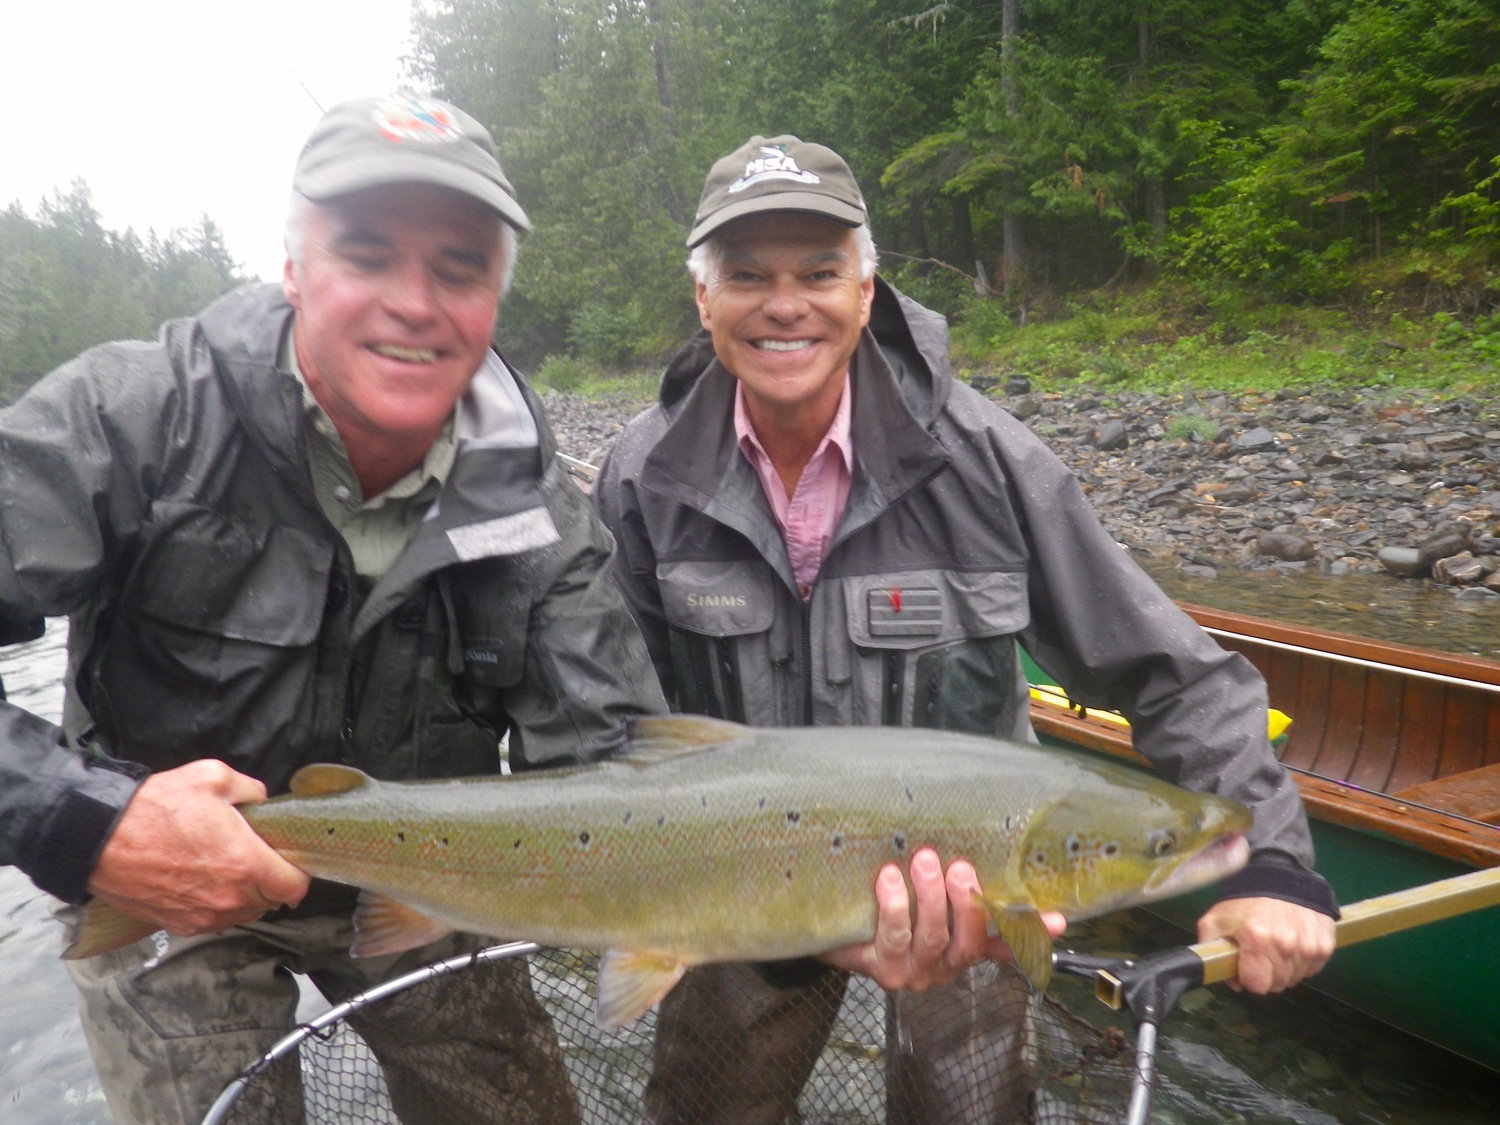 Two beaming smiles while returning another great Atlantic Salmon fish